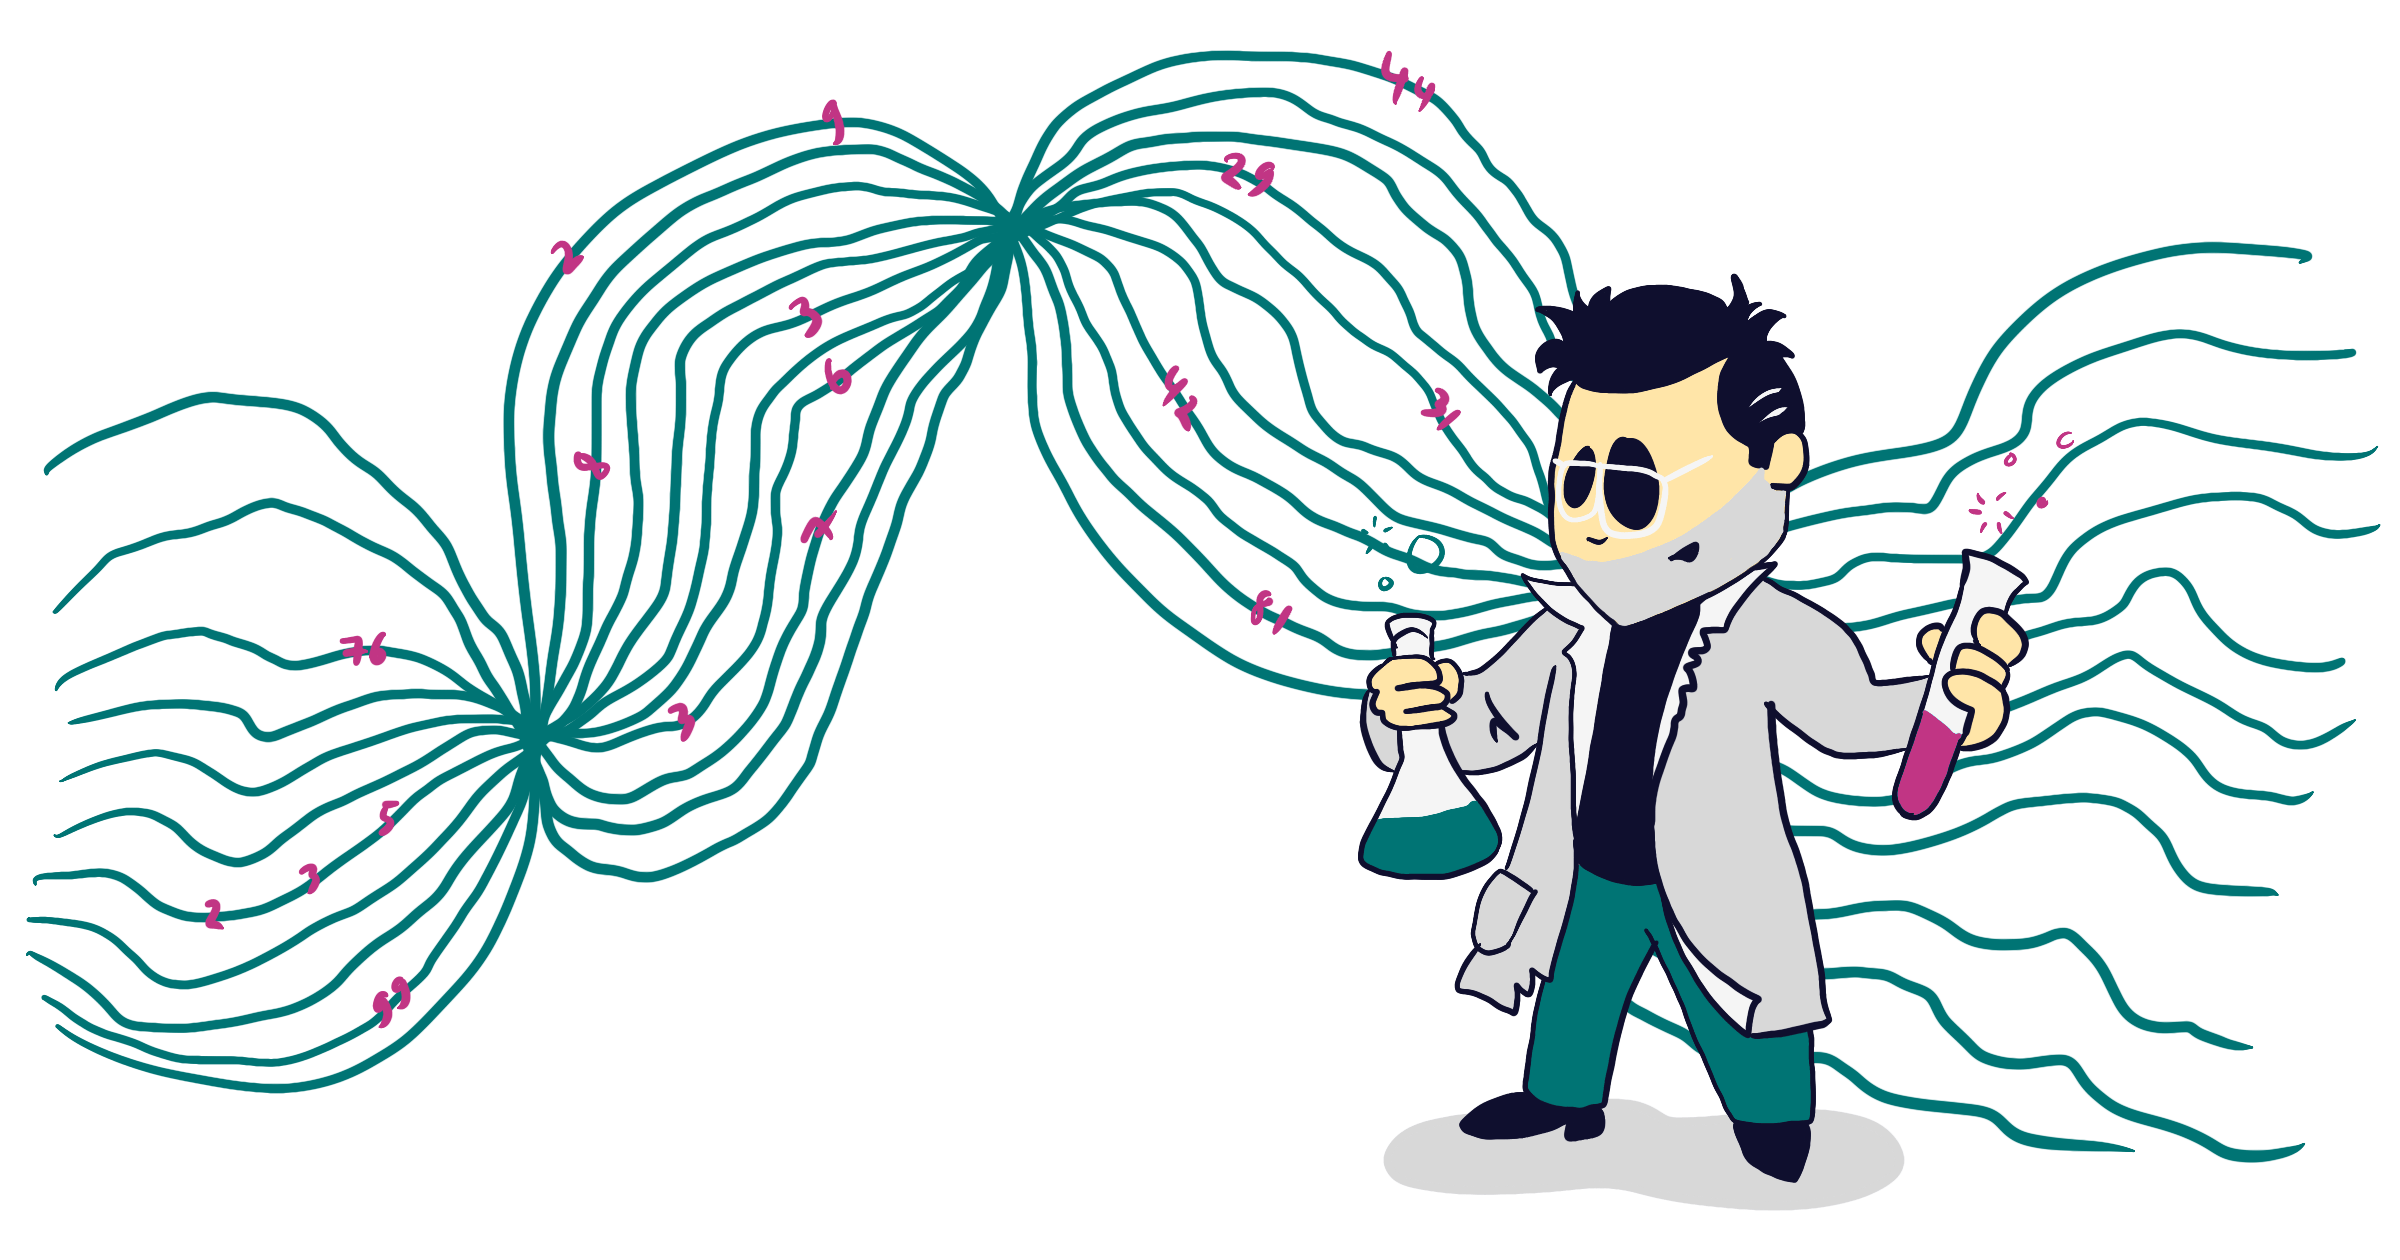 Cartoon-version of Carlos Eriksson dressed as a scientist, processing large amounts of numbers that are floating by.